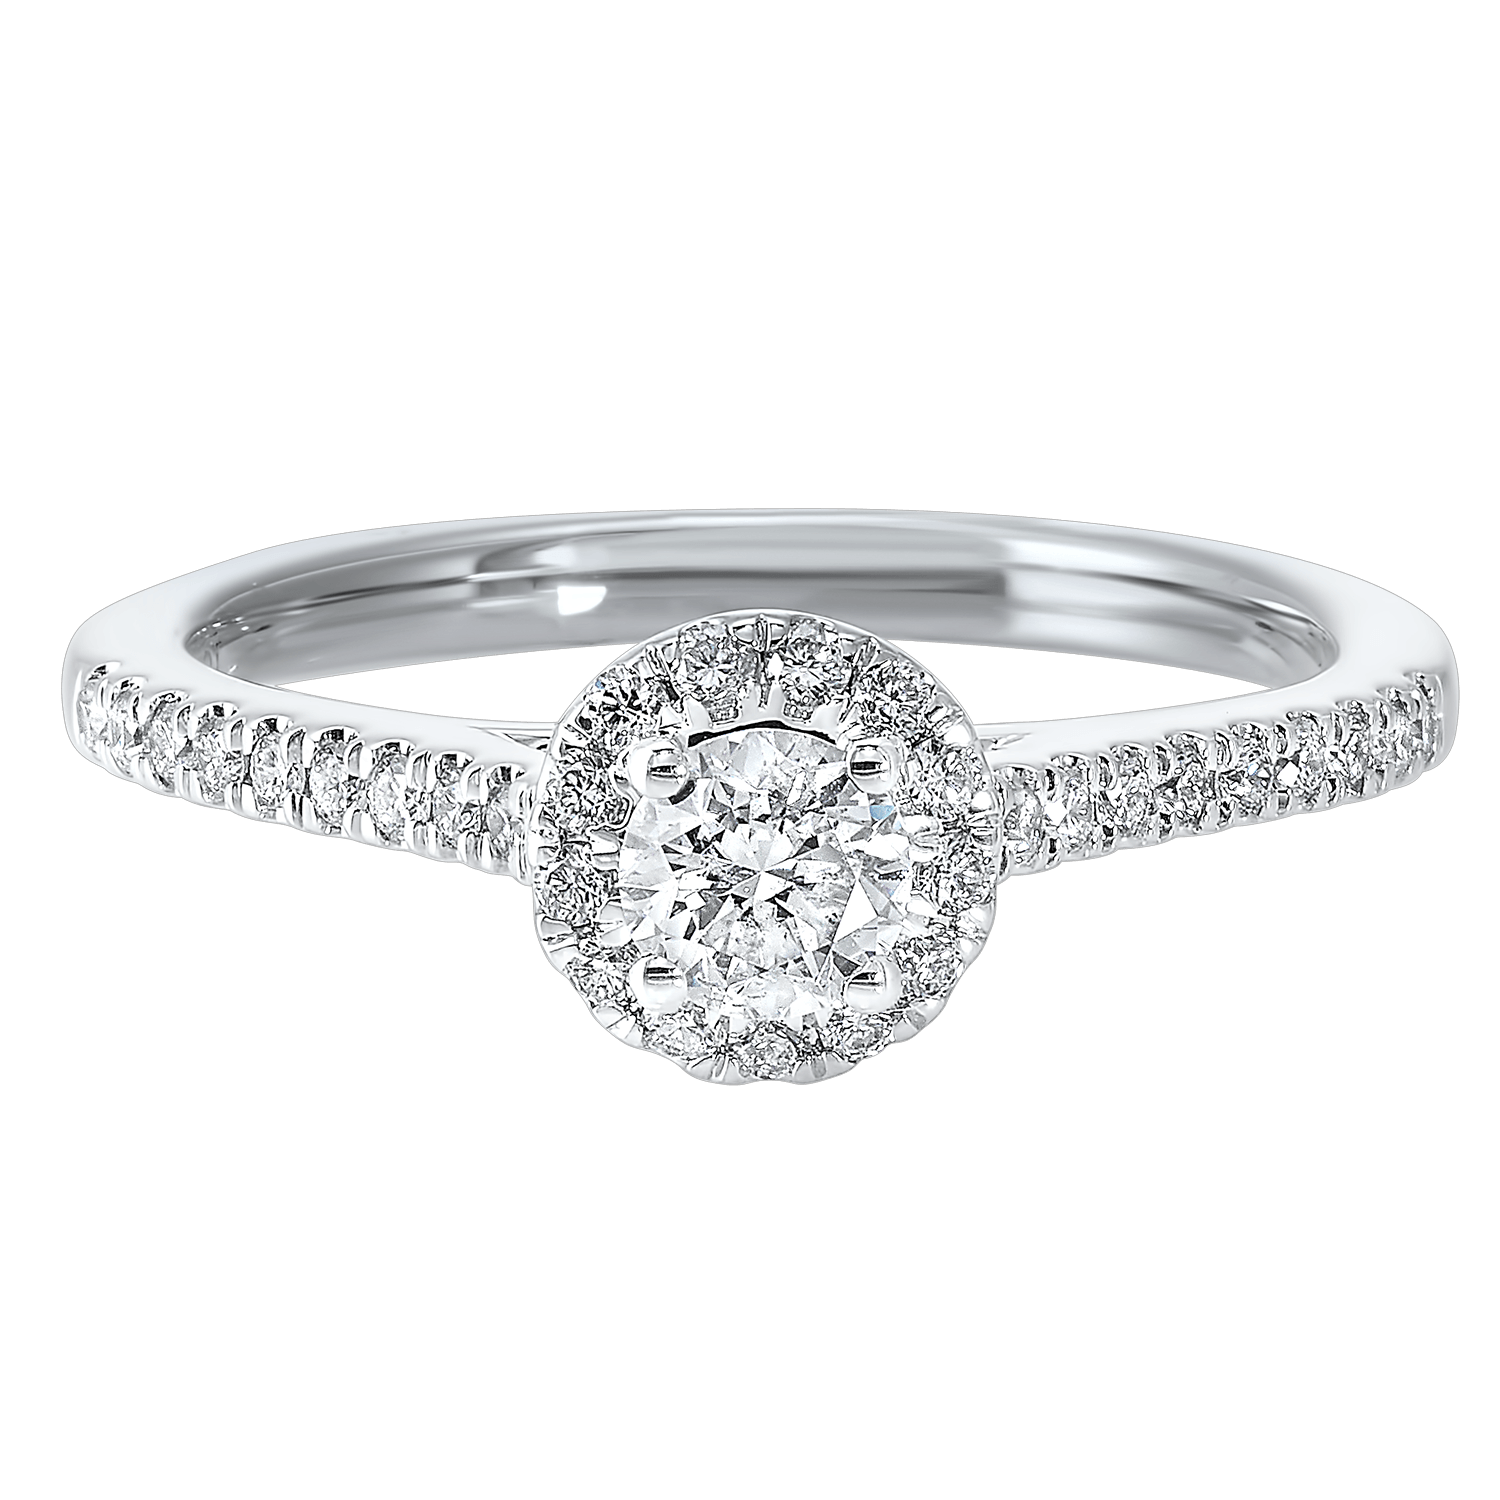 BW James Jewelers Ring 16 Page Christmas Catalog Offer 14KTW Diamond Halo Engagement Ring 1/2Ct